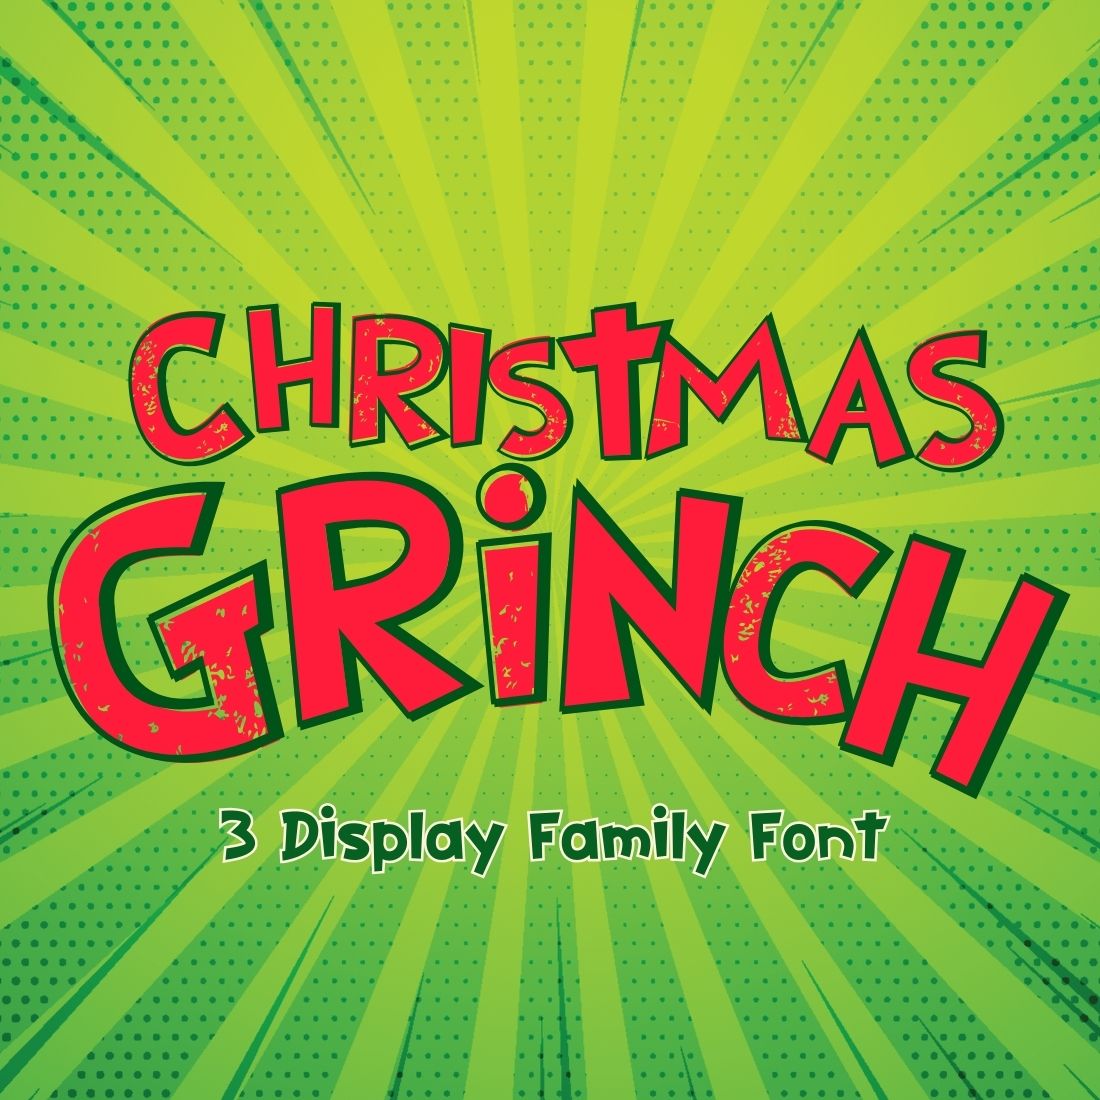 Christmas Grinch is a display font cover image.